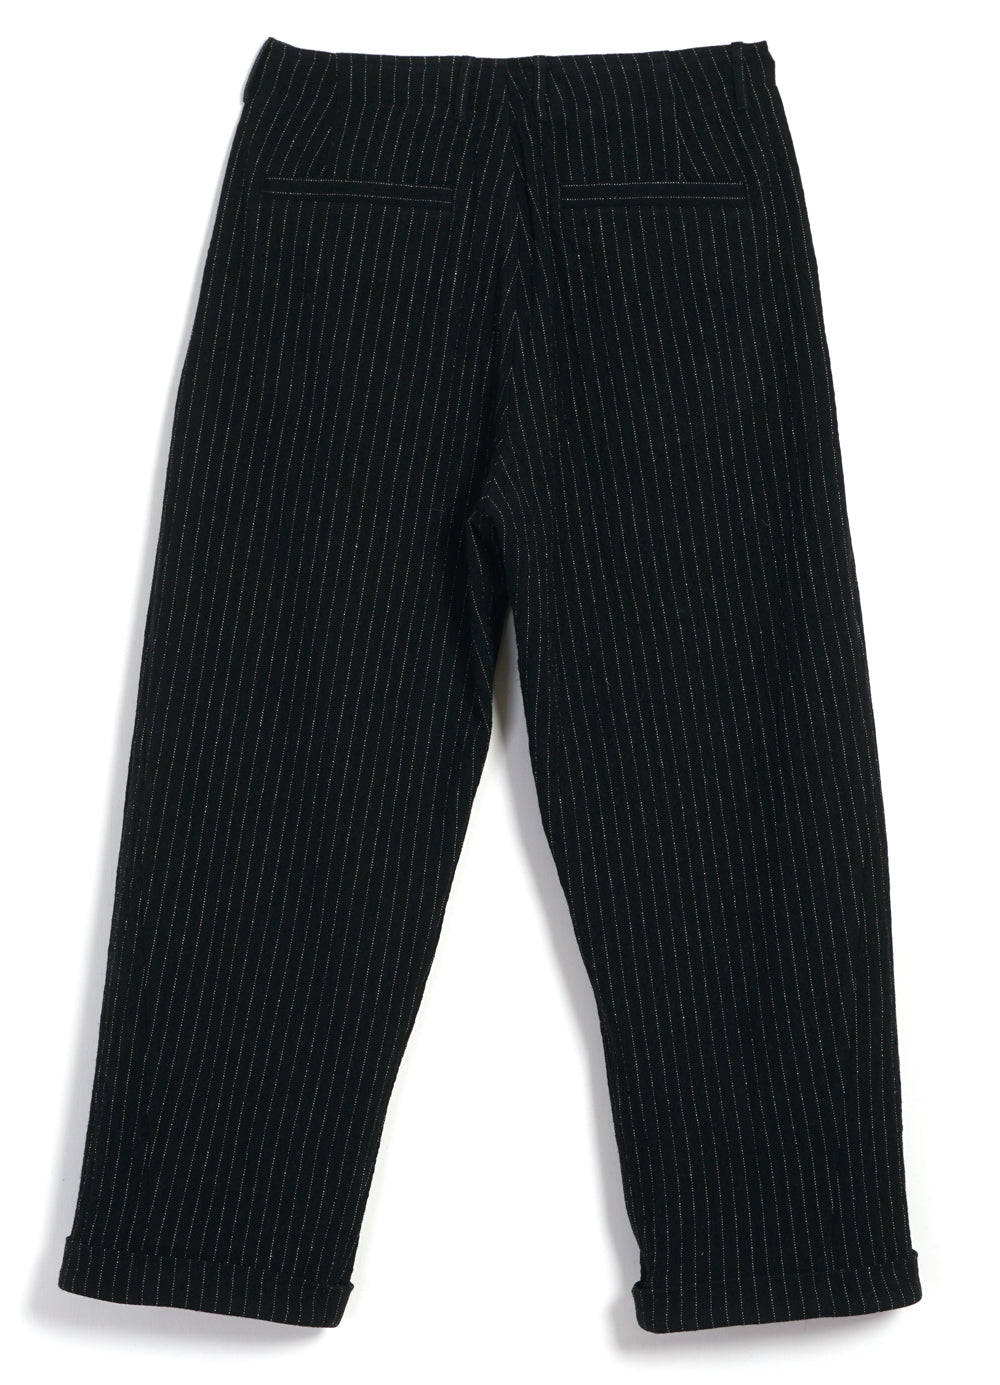 BOBBY | Super Wide Pleated Trousers | Big Pin Black